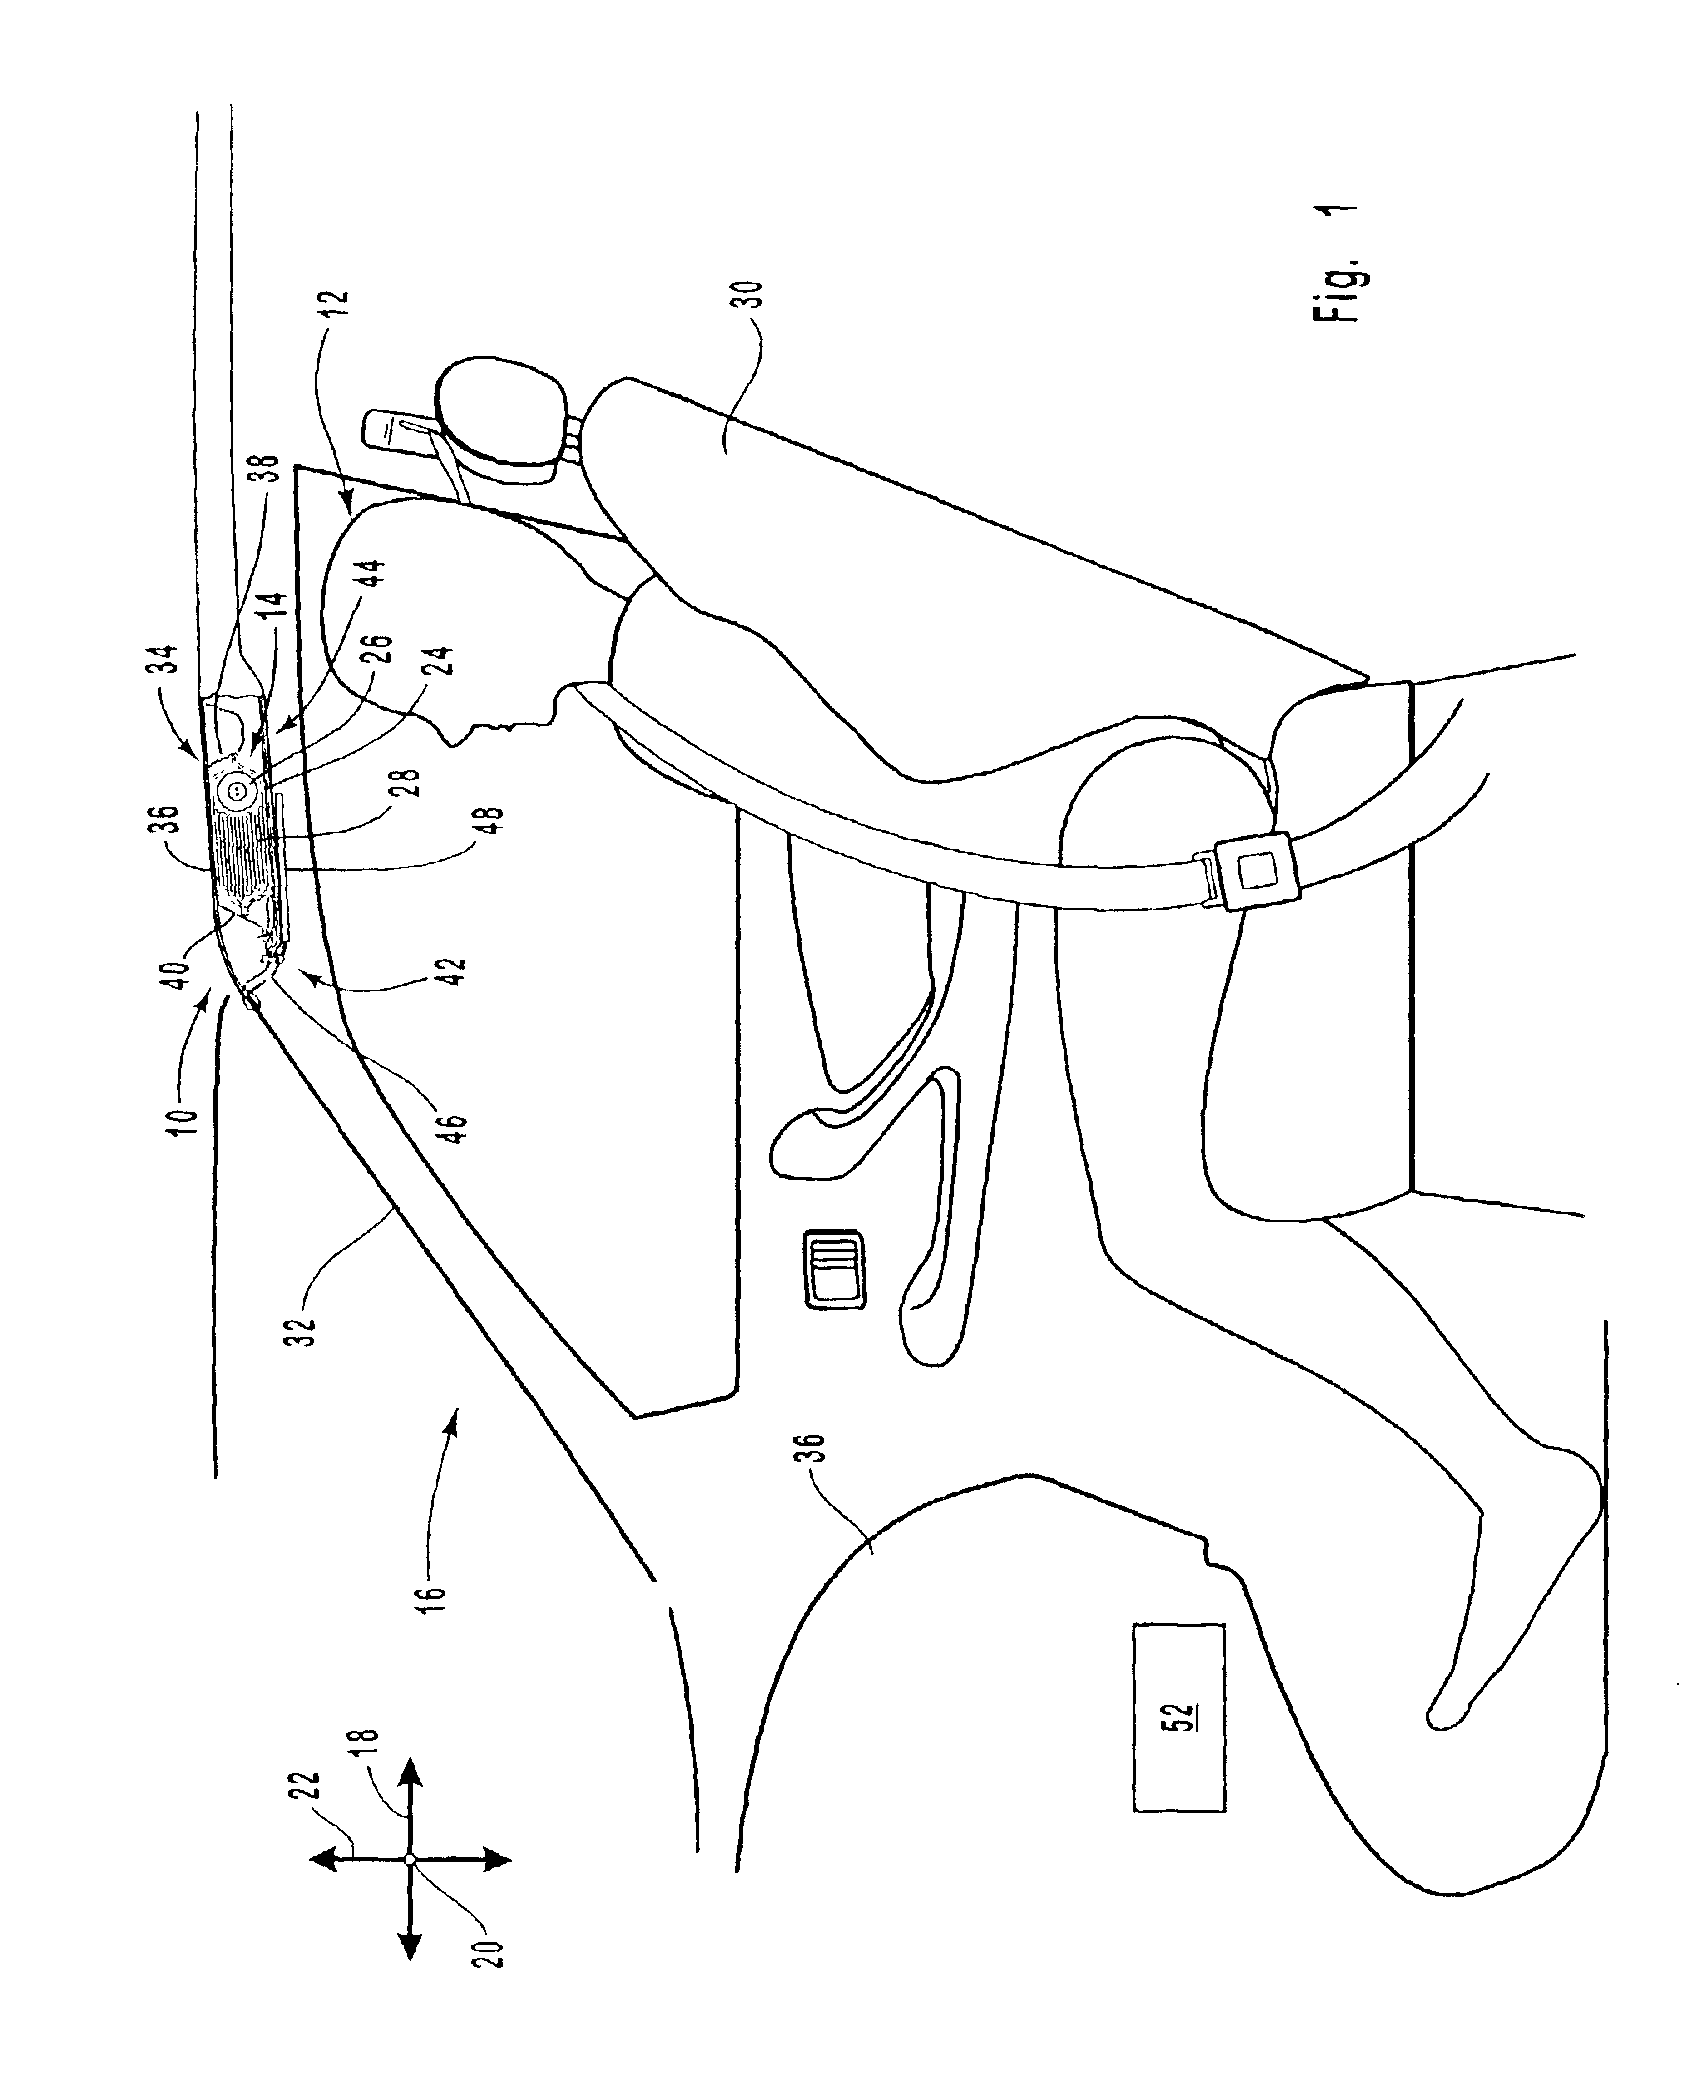 Overhead airbag deployment apparatus and method